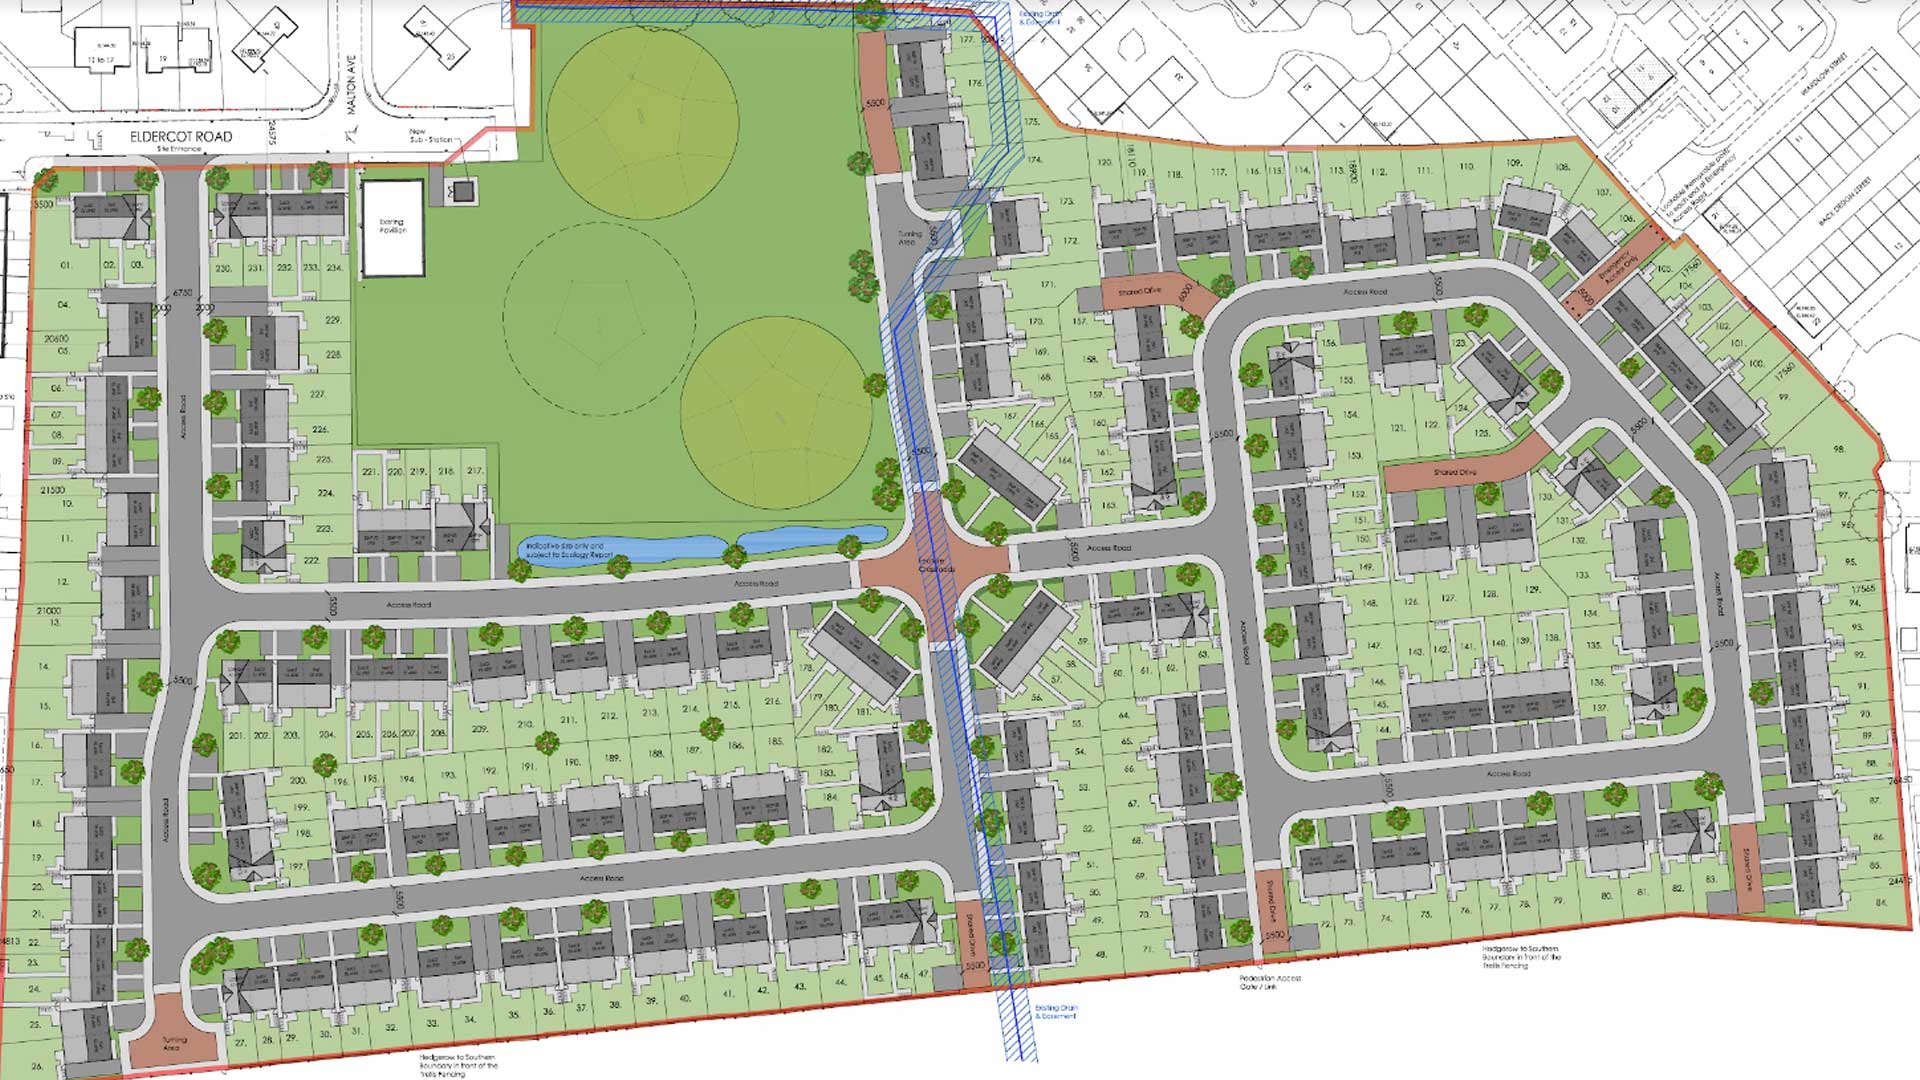 MCI originally secured full planning permission on Appeal on 9th May 2019, and the site was then acquired and sold on to our Registered Provider partner, Your Housing Group’s subsidiary company Nuvu Developments Limited